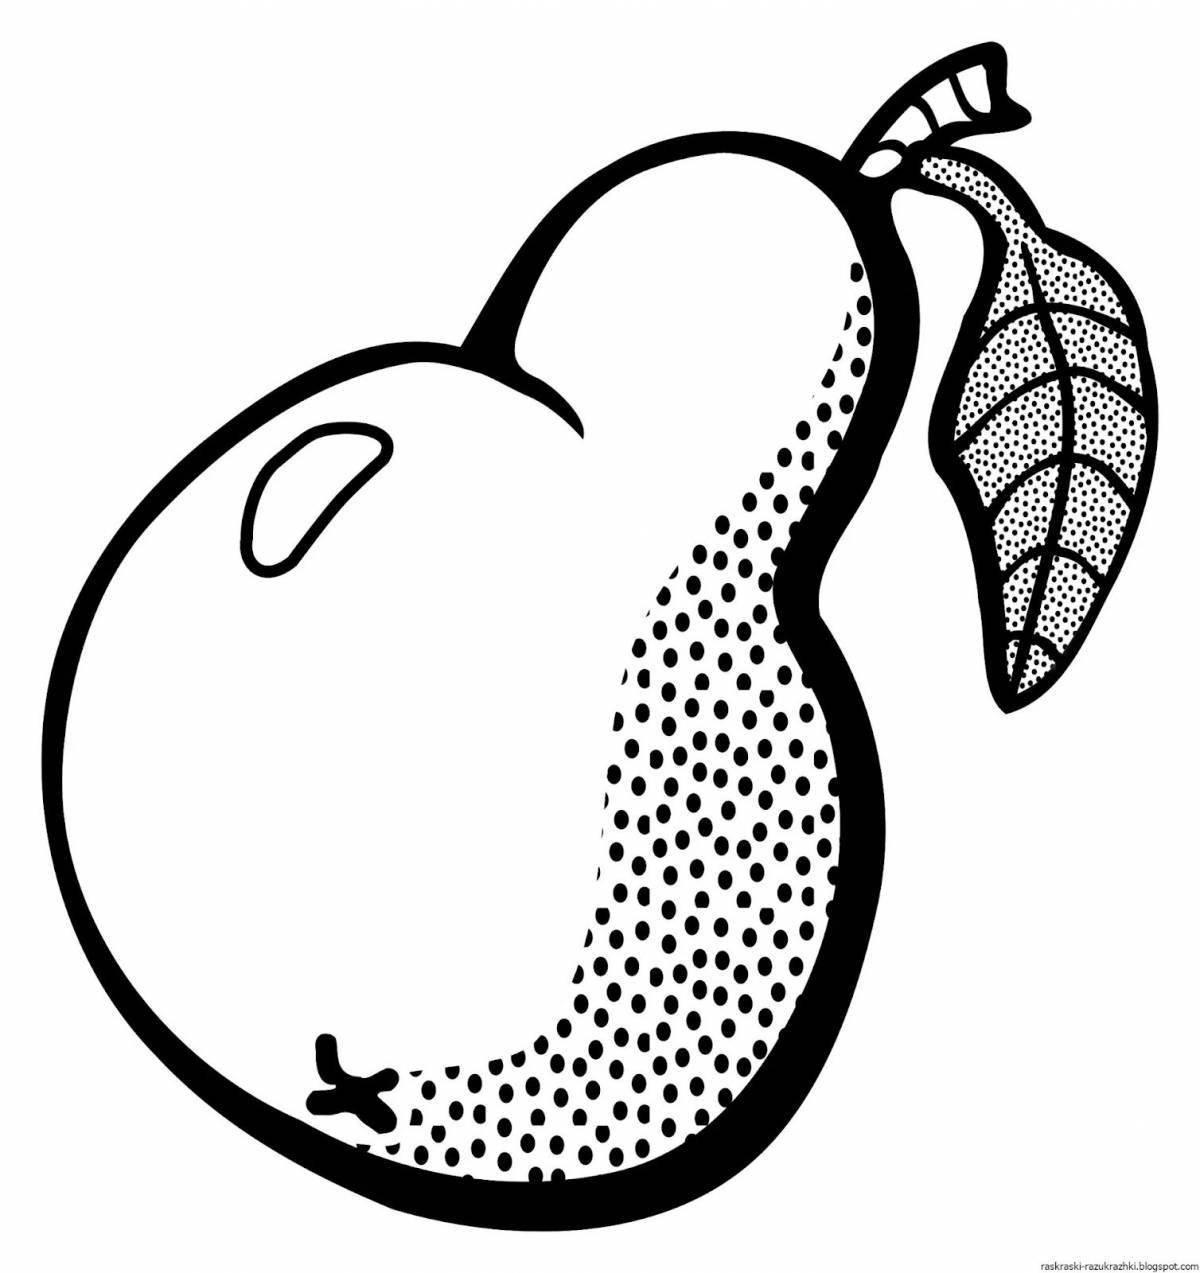 Coloring book playful apple pear